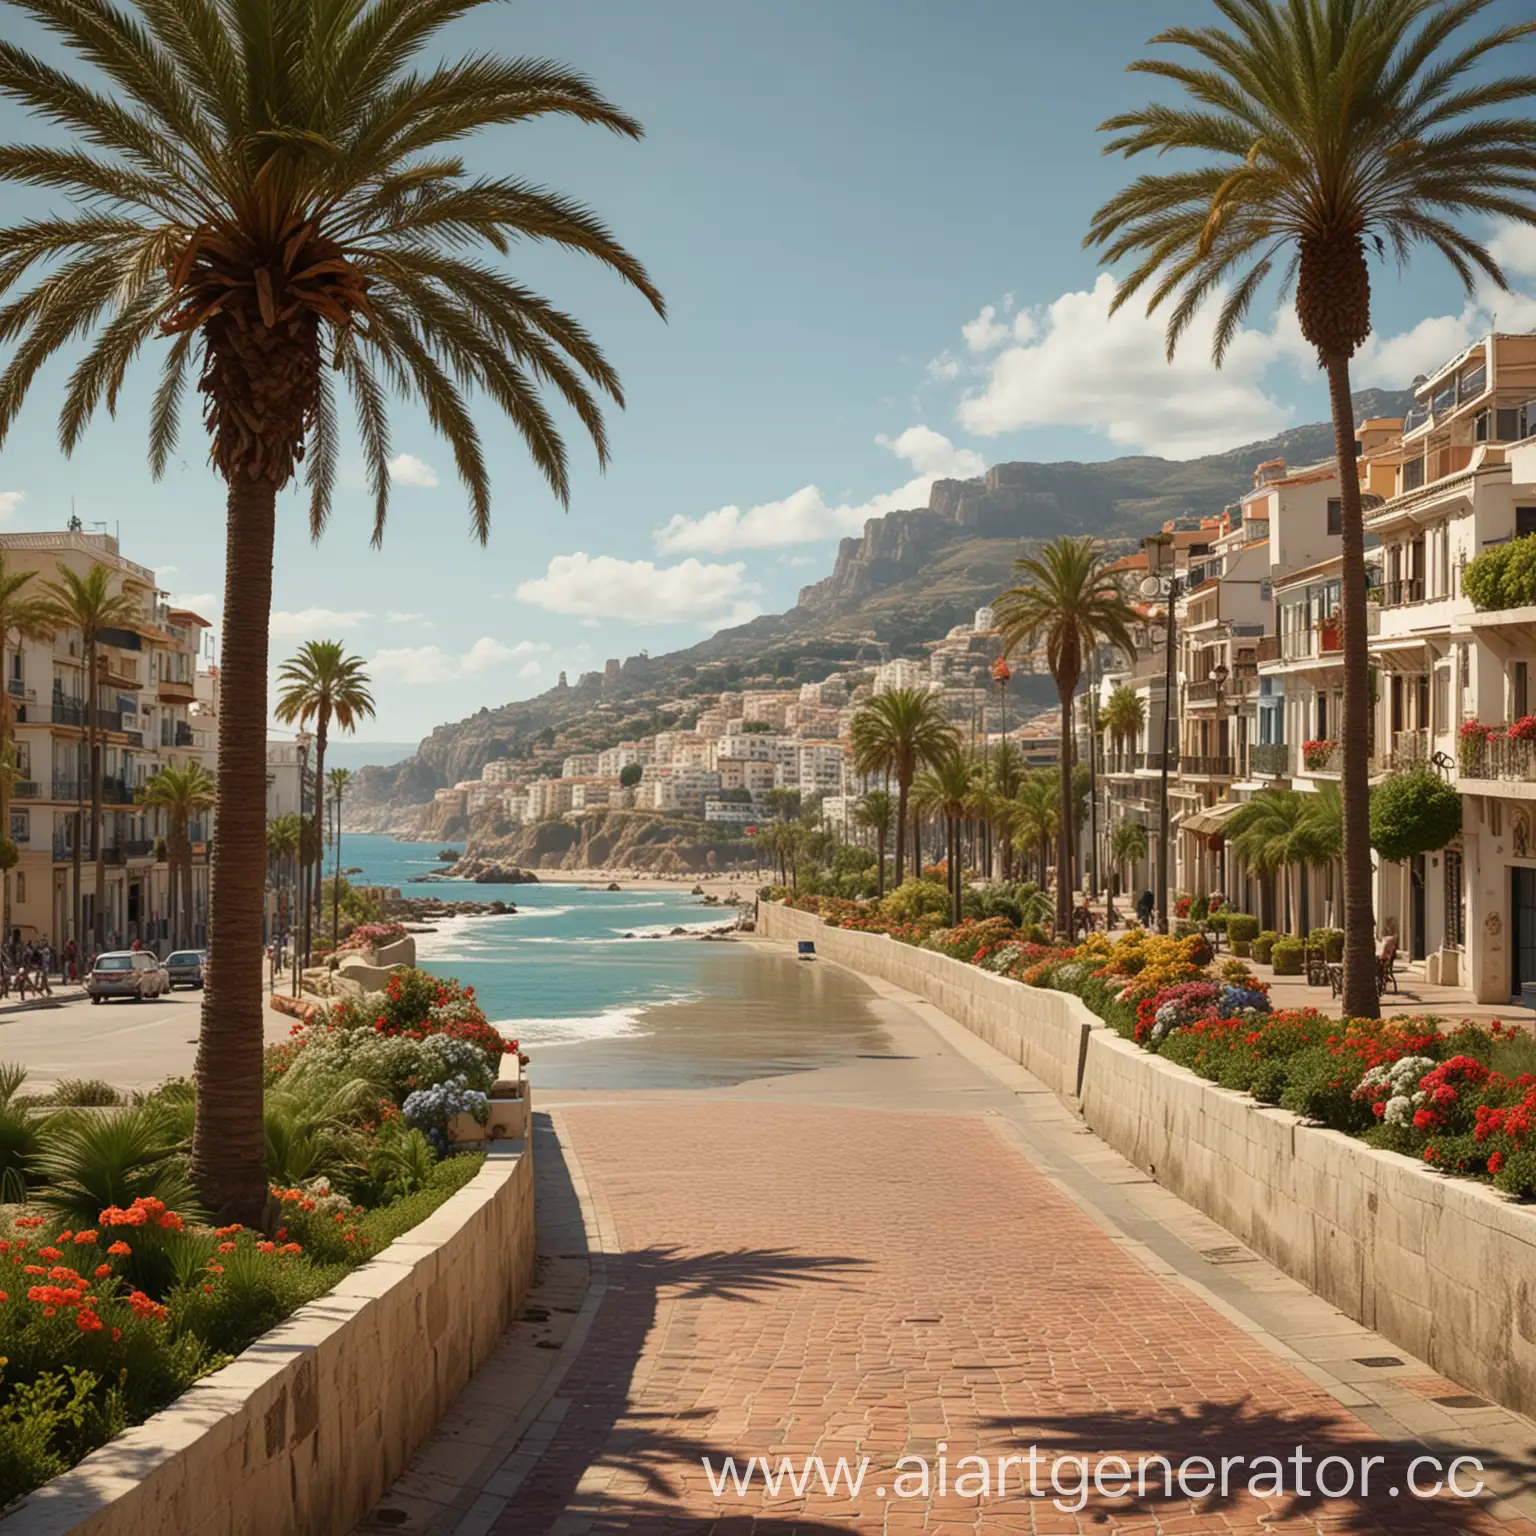 Picturesque-Coastal-Cityscape-Vibrant-Streets-of-a-Spanish-Seaside-Haven